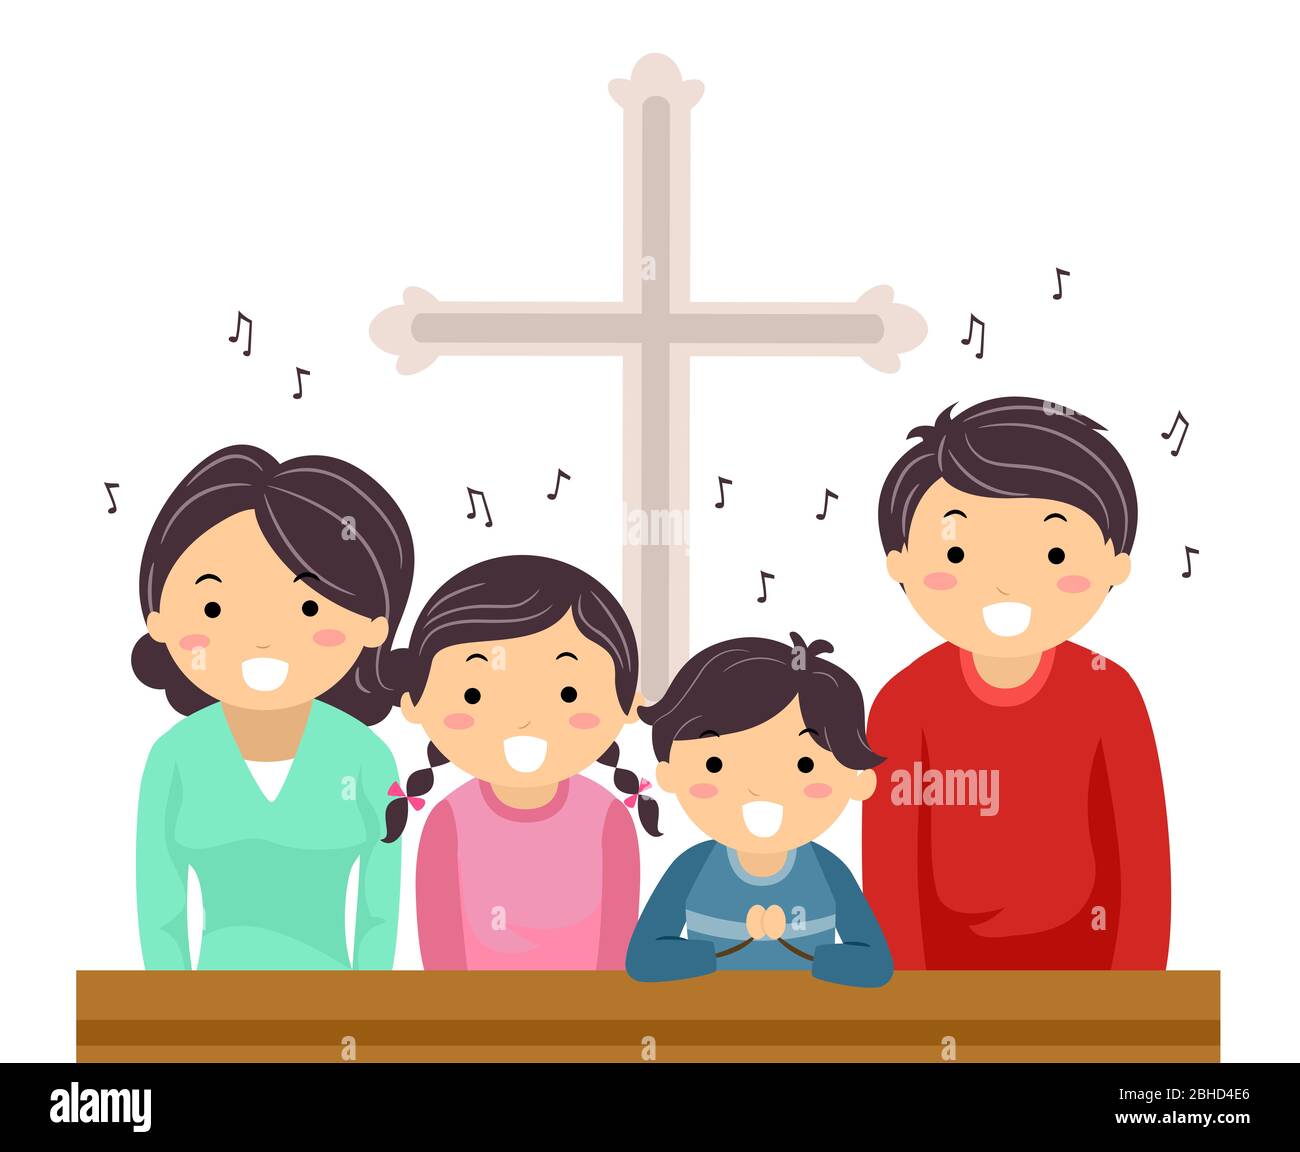 Illustration of Stickman Family in Church Singing Songs in Mass Stock Photo